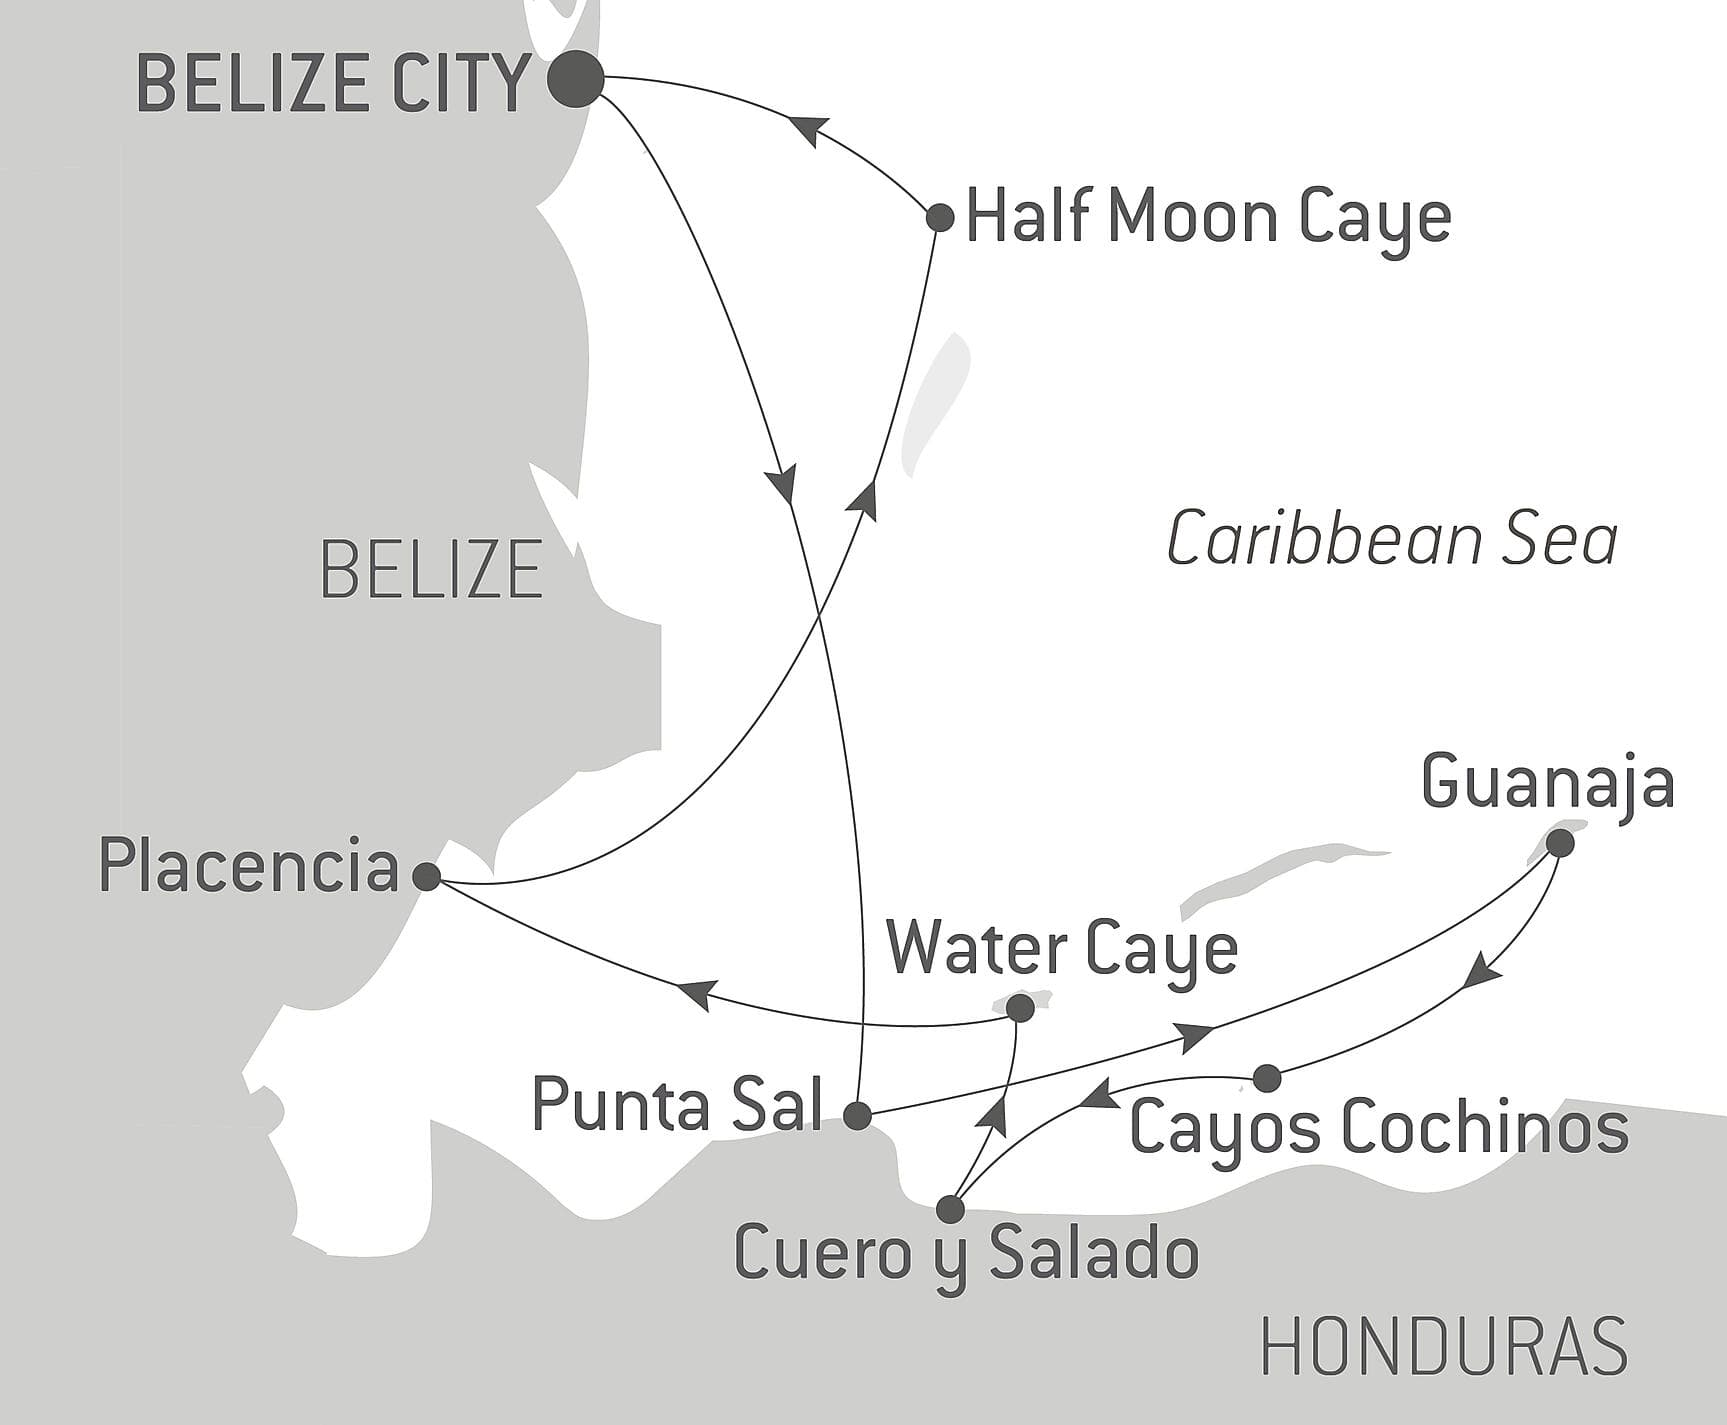 Belize and Honduras: unexpected encounters and nature